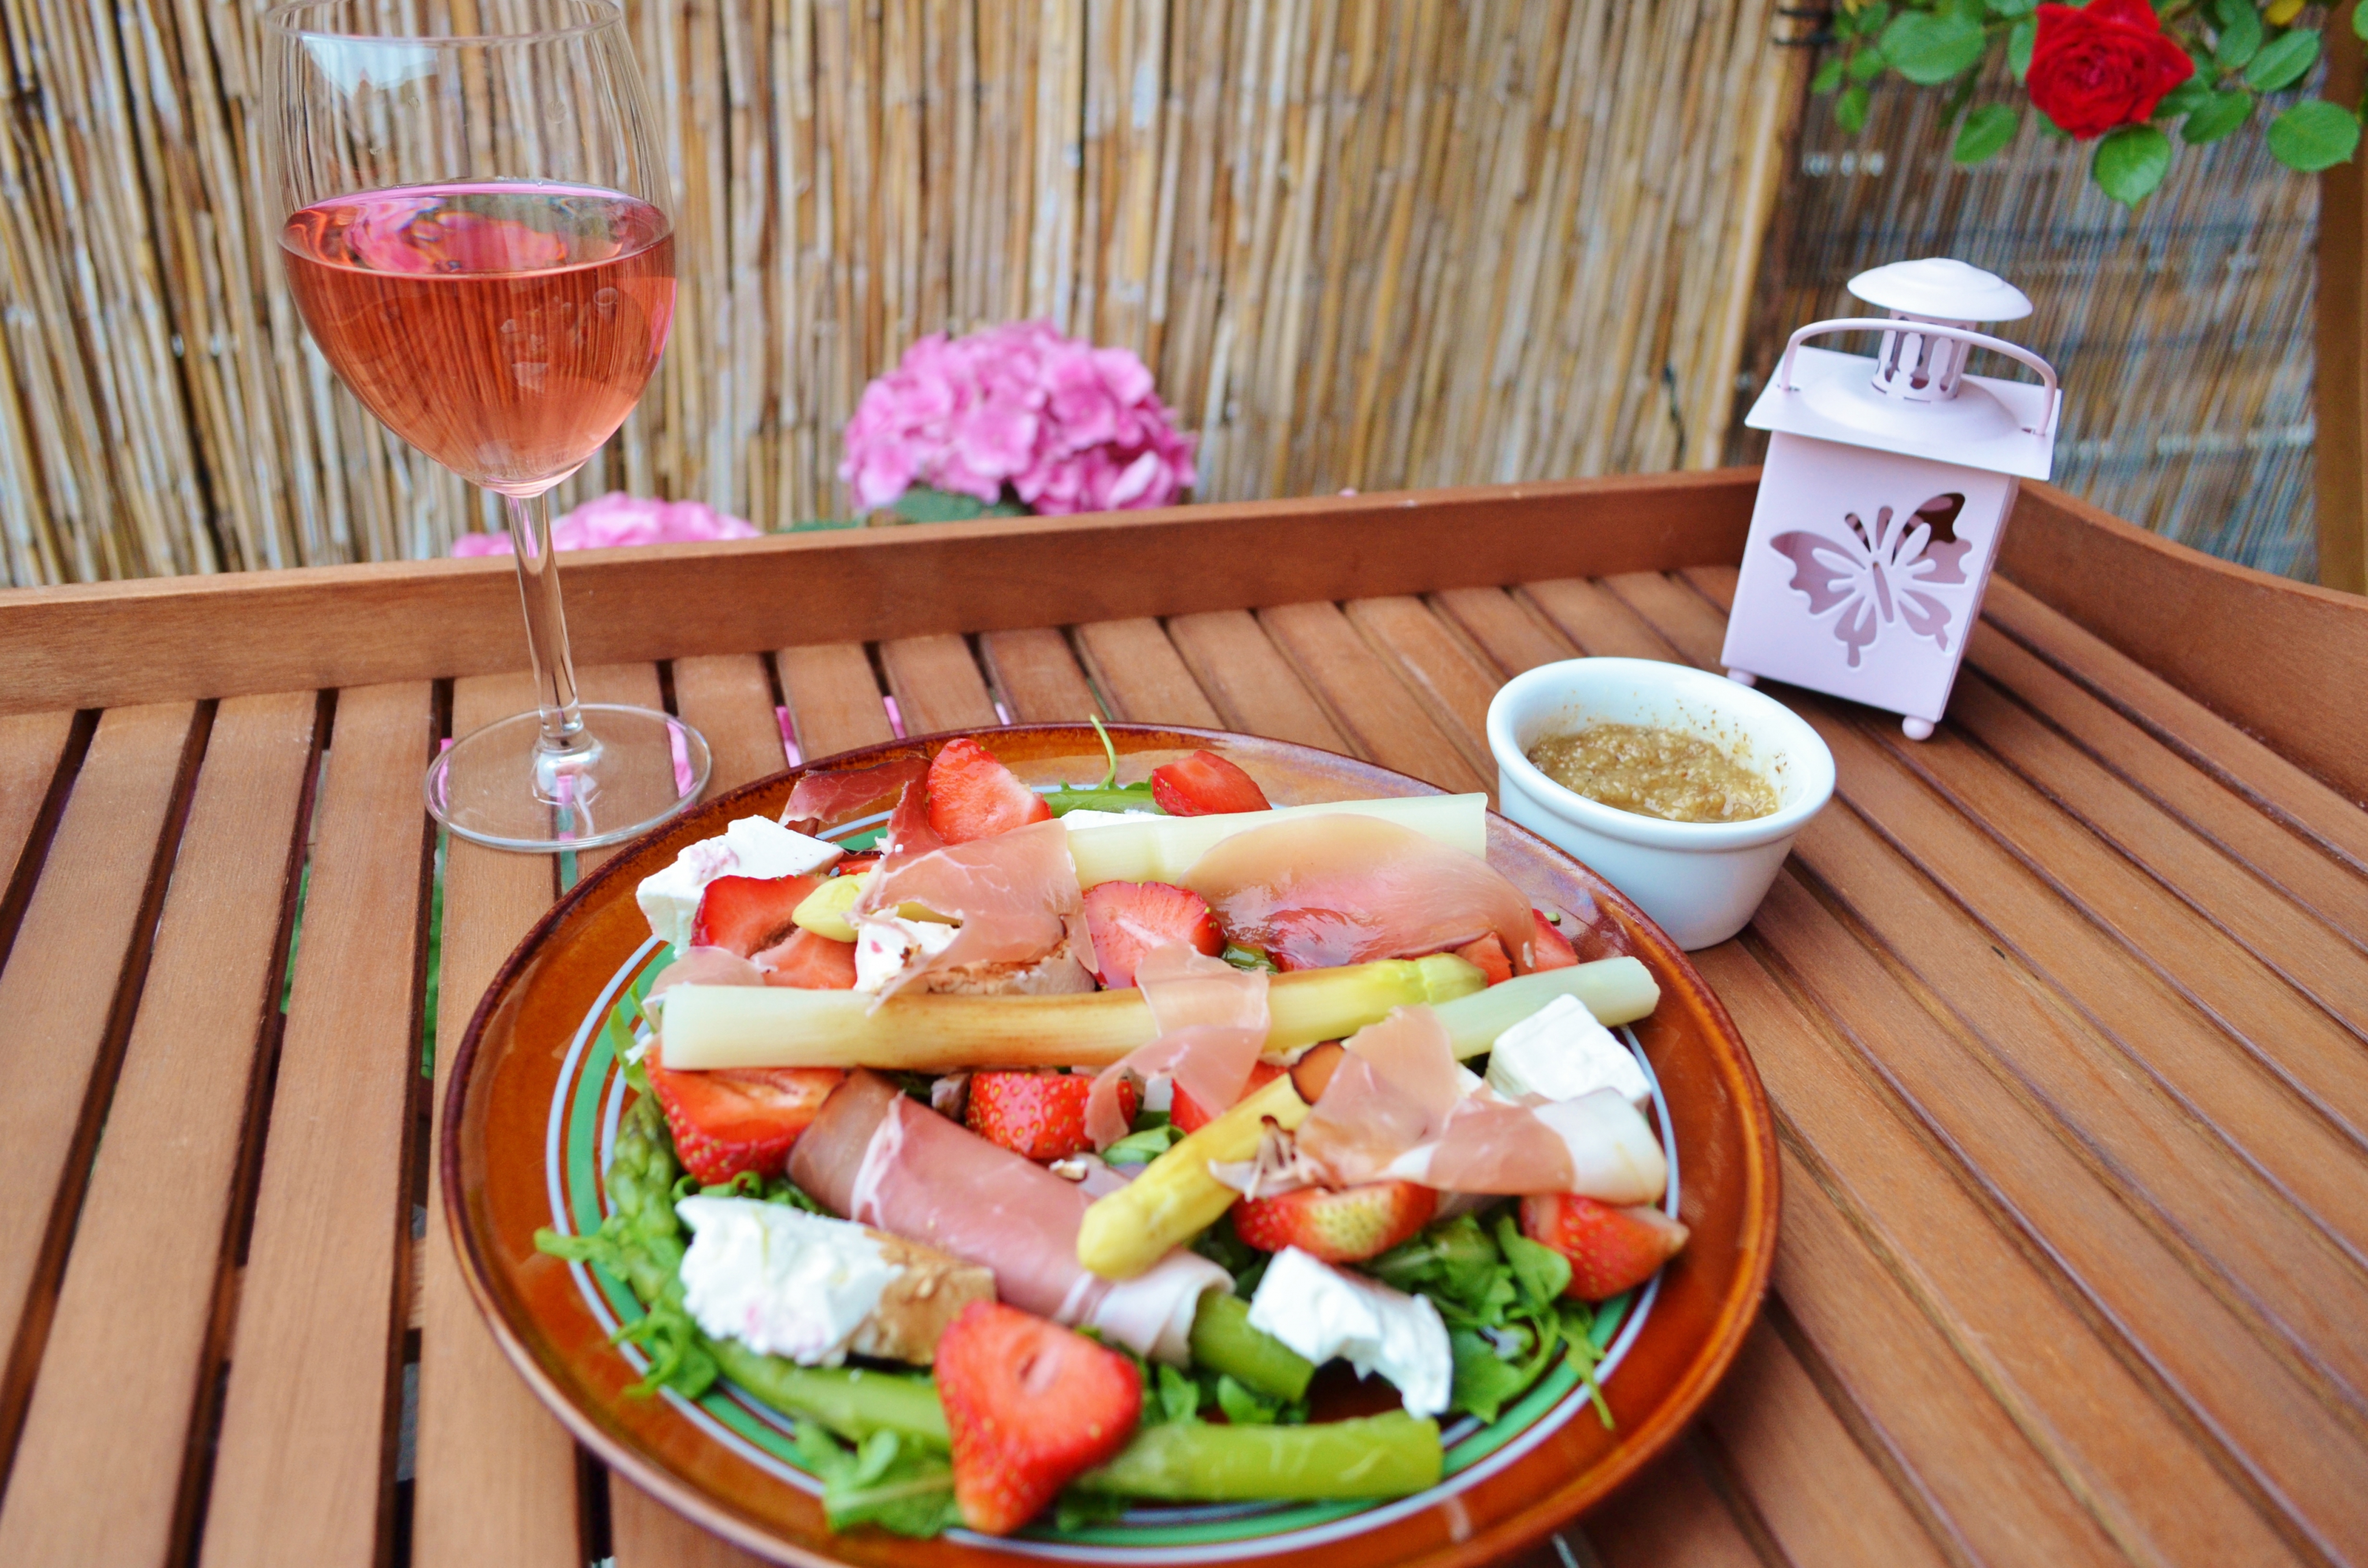 Asparagus with prosciutto, strawberries and goat cheese!